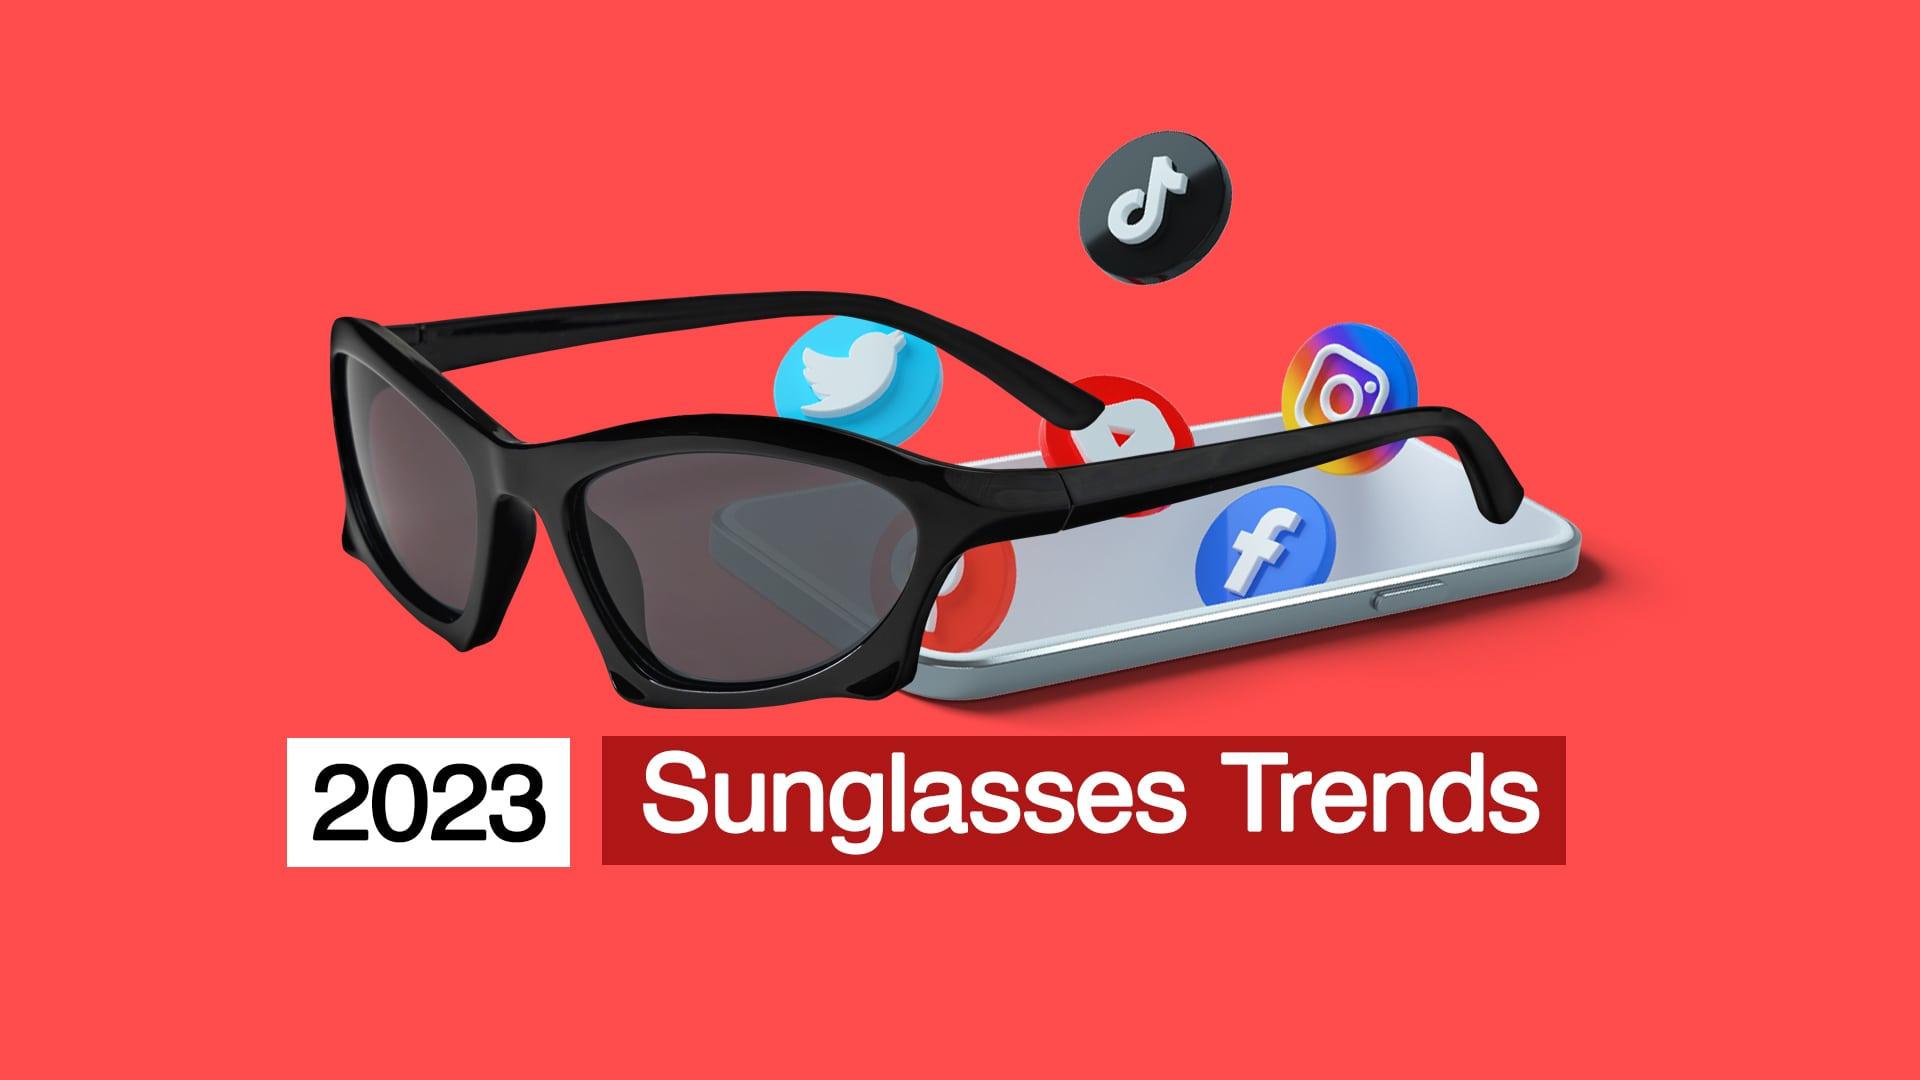 The Top Sunglasses Trends of 2023